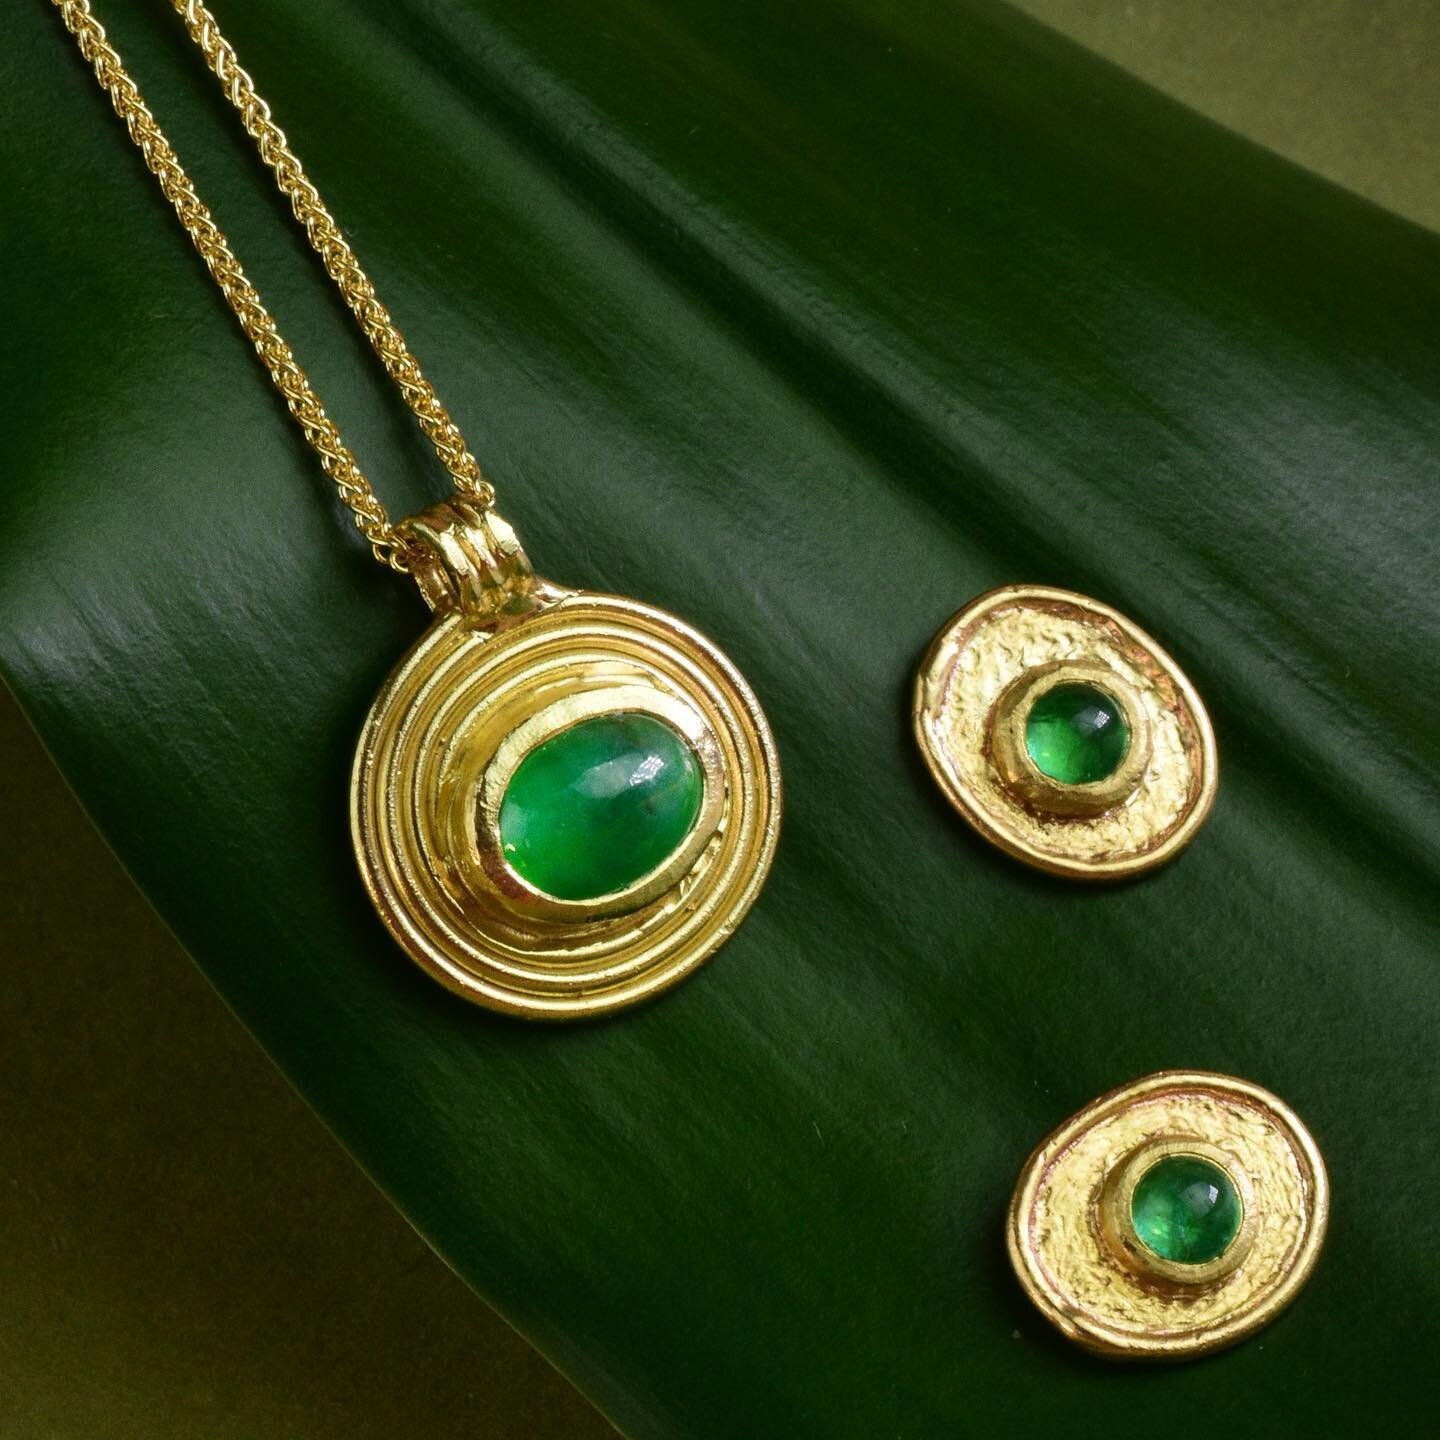 ~Emeralds~ at this point everyone knows we love emeralds, But who doesn&rsquo;t right?
The rich yellow gold and vibrant emerald green of our &ldquo;unearthed&rdquo; Pendant has proved really popular. Another one left our studio last week for a lucky 